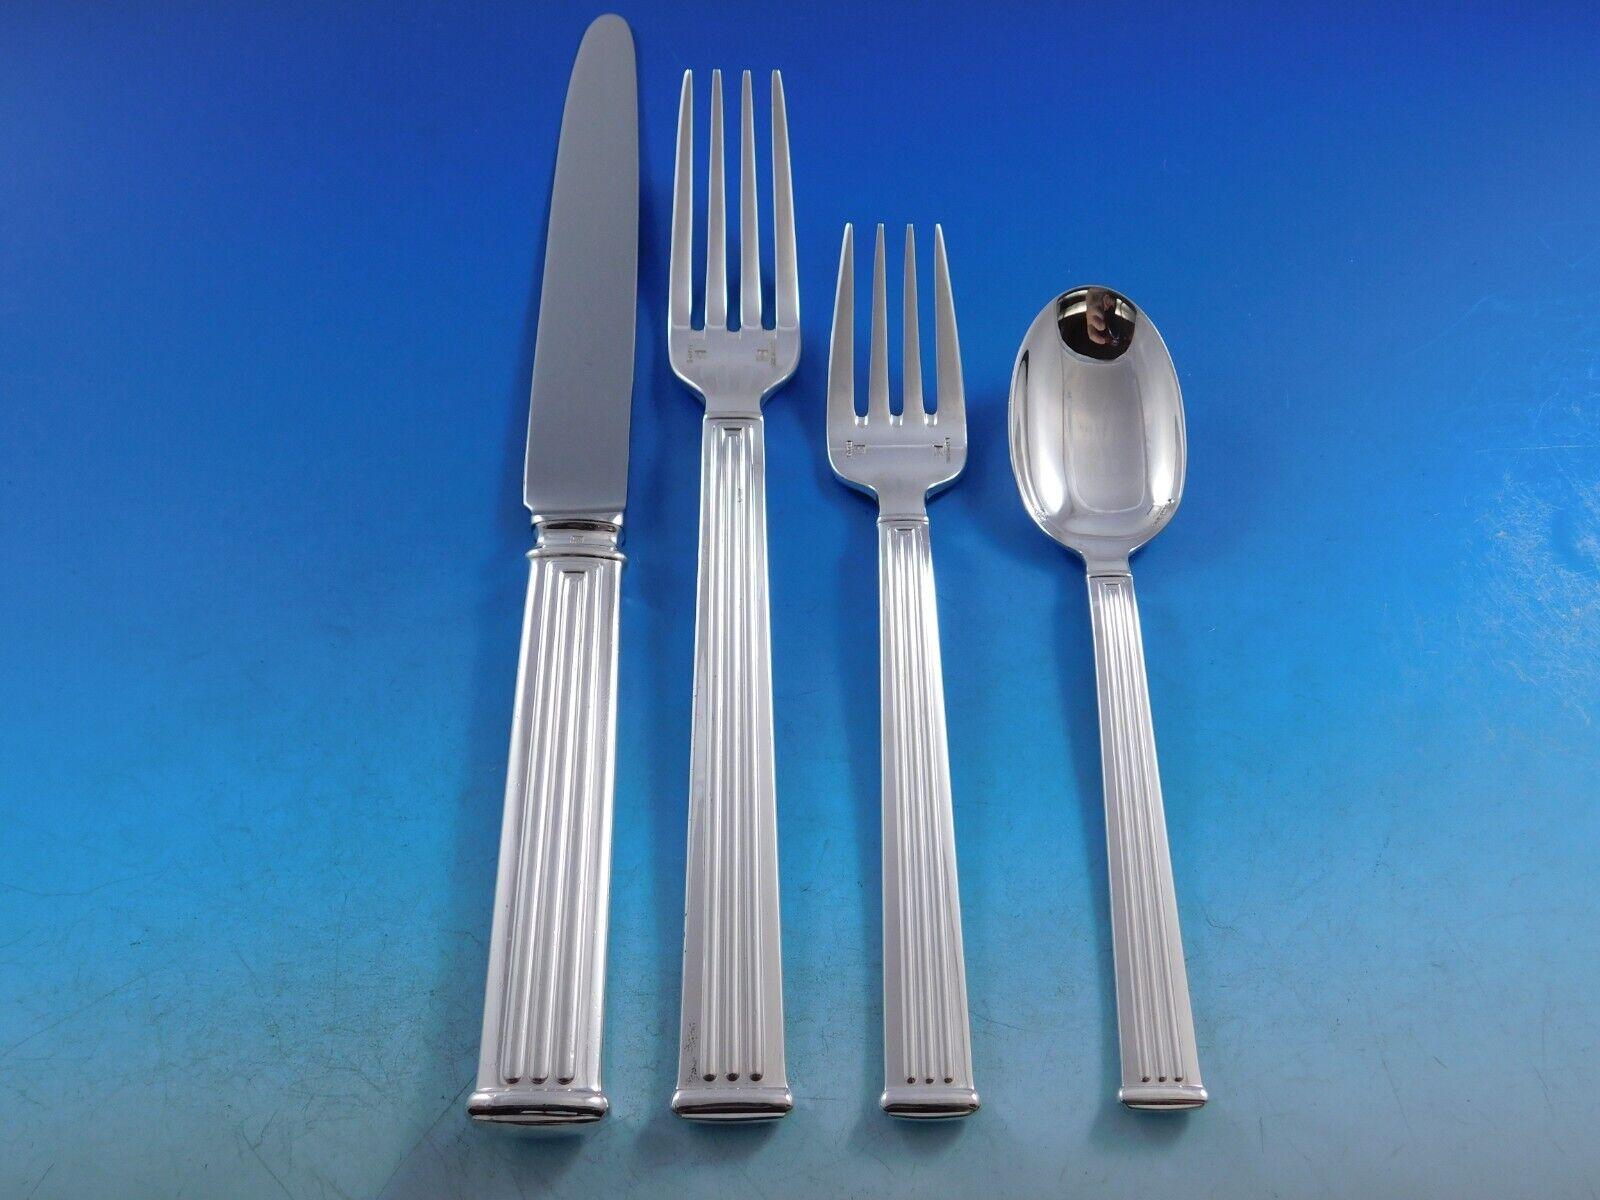 Modern clean lines in a Classic column motif makes this pattern, Triade, forever timeless. 
Monumental Dinner Size Triade by Christofle France Silverplated Flatware set - 160 pieces. This set includes:

12 Dinner Knives, 9 3/4